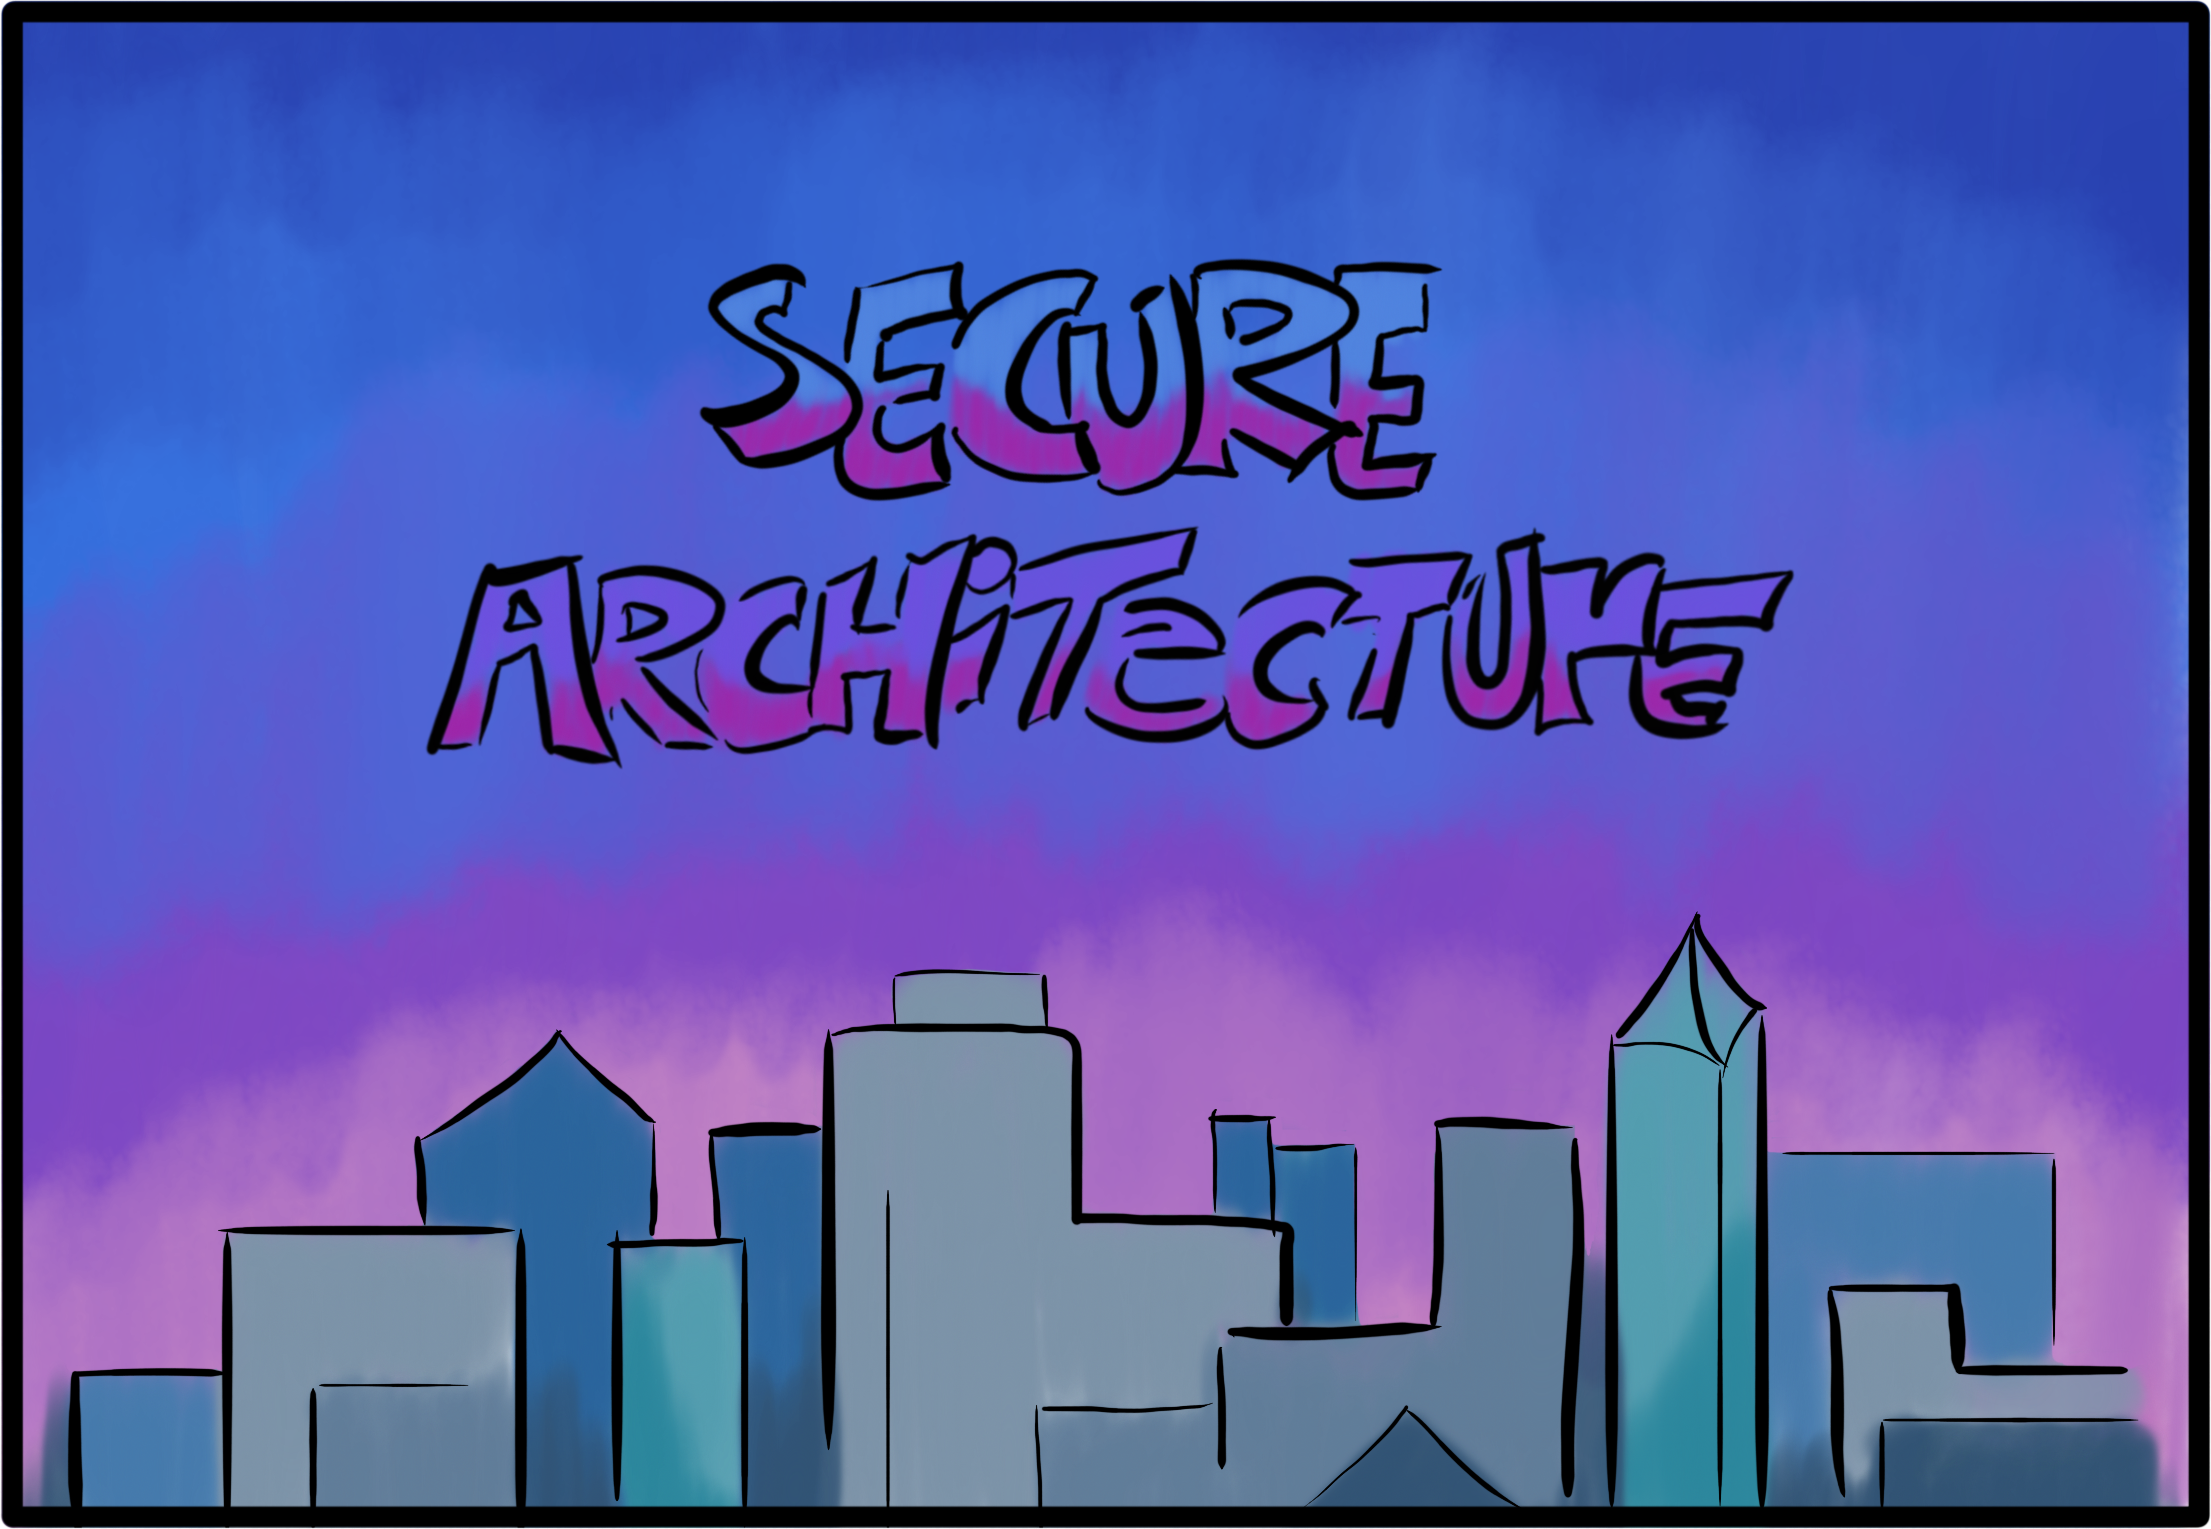 How to make your app's architecture secure right now: separation, configuration, and access